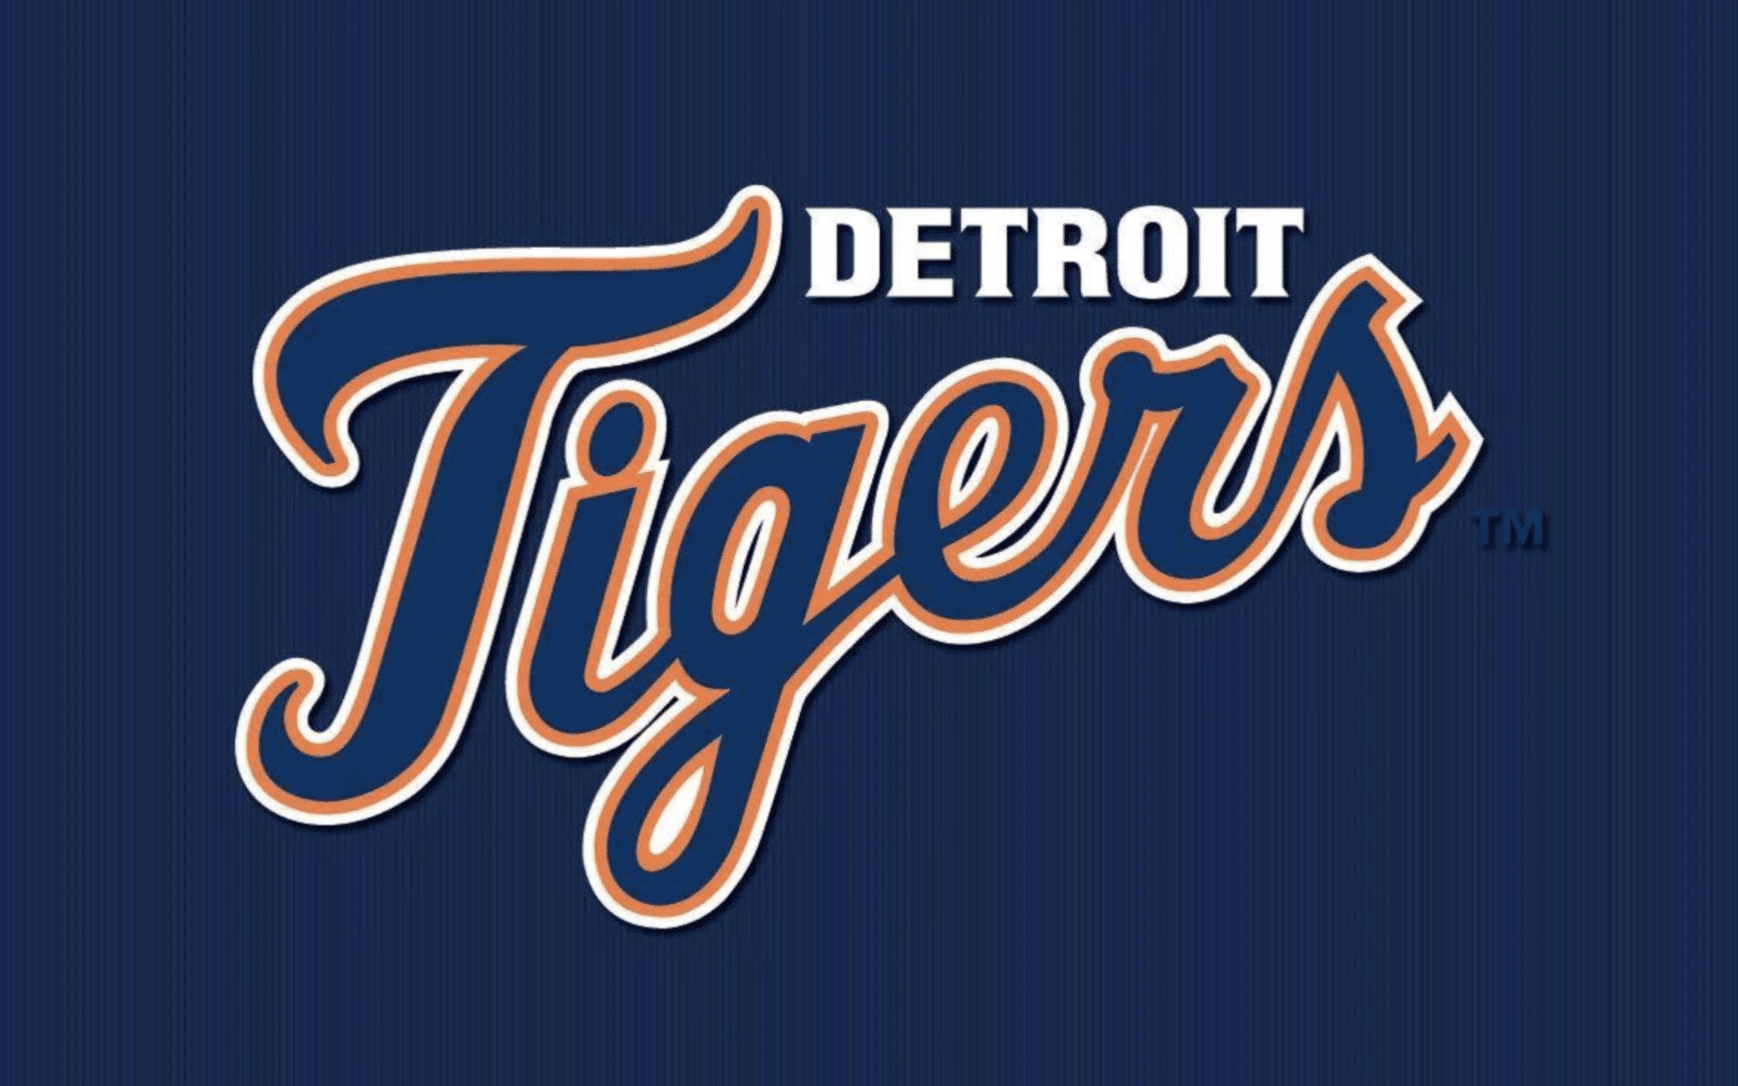 Detroit Tigers to unveil Detroit Tigers Spring Training Roster Detroit Tigers acquire Blake Dickerson Reese Olson Detroit Tigers prospect Jackson Jobe